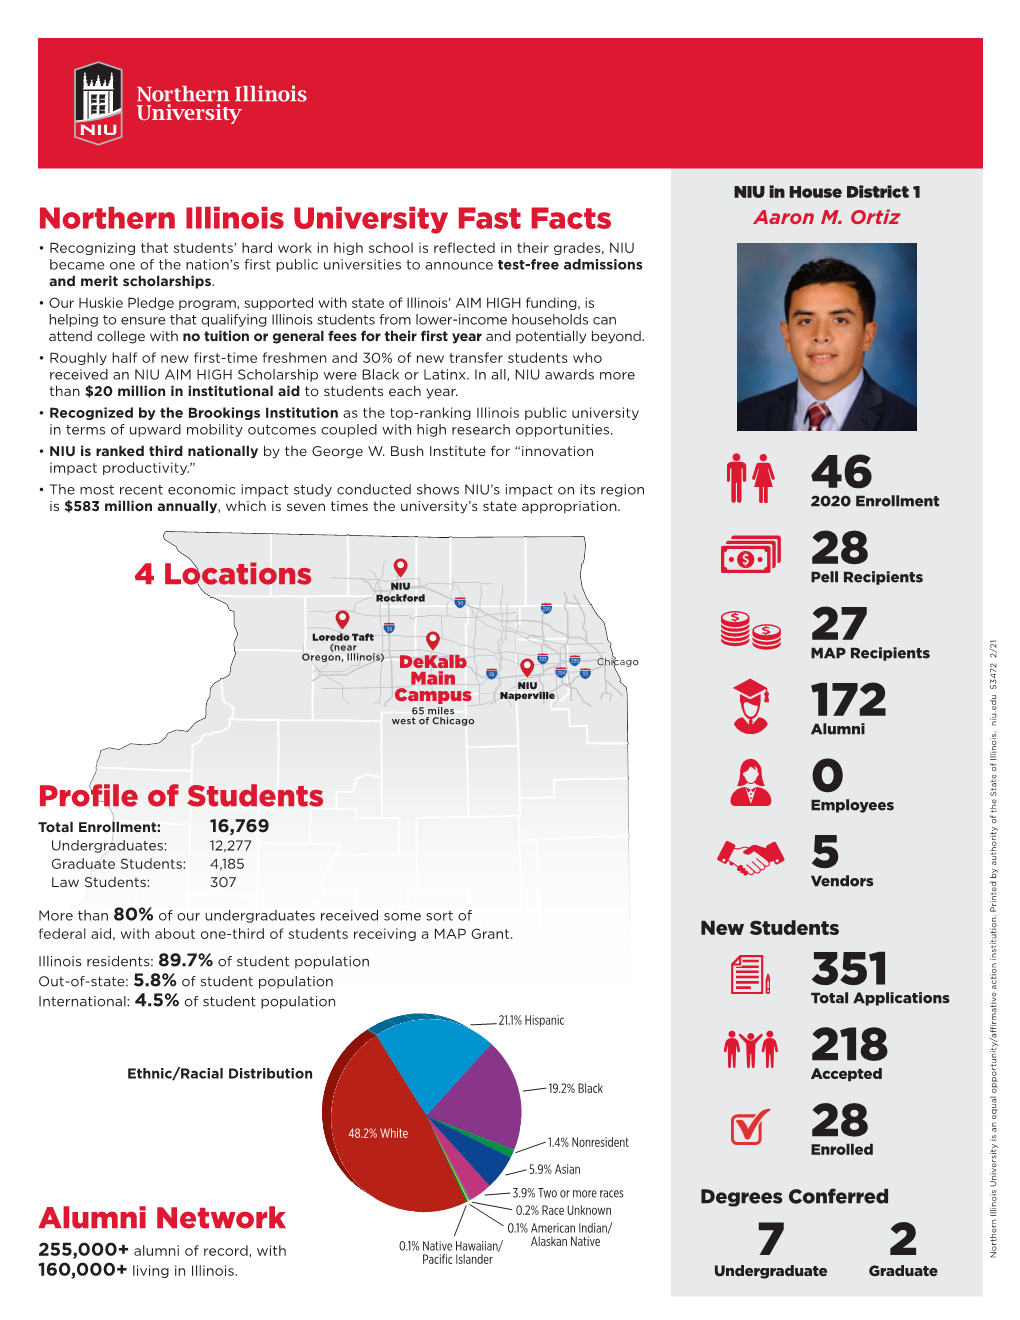 Northern Illinois University Fast Facts 4 Locations Profile of Students